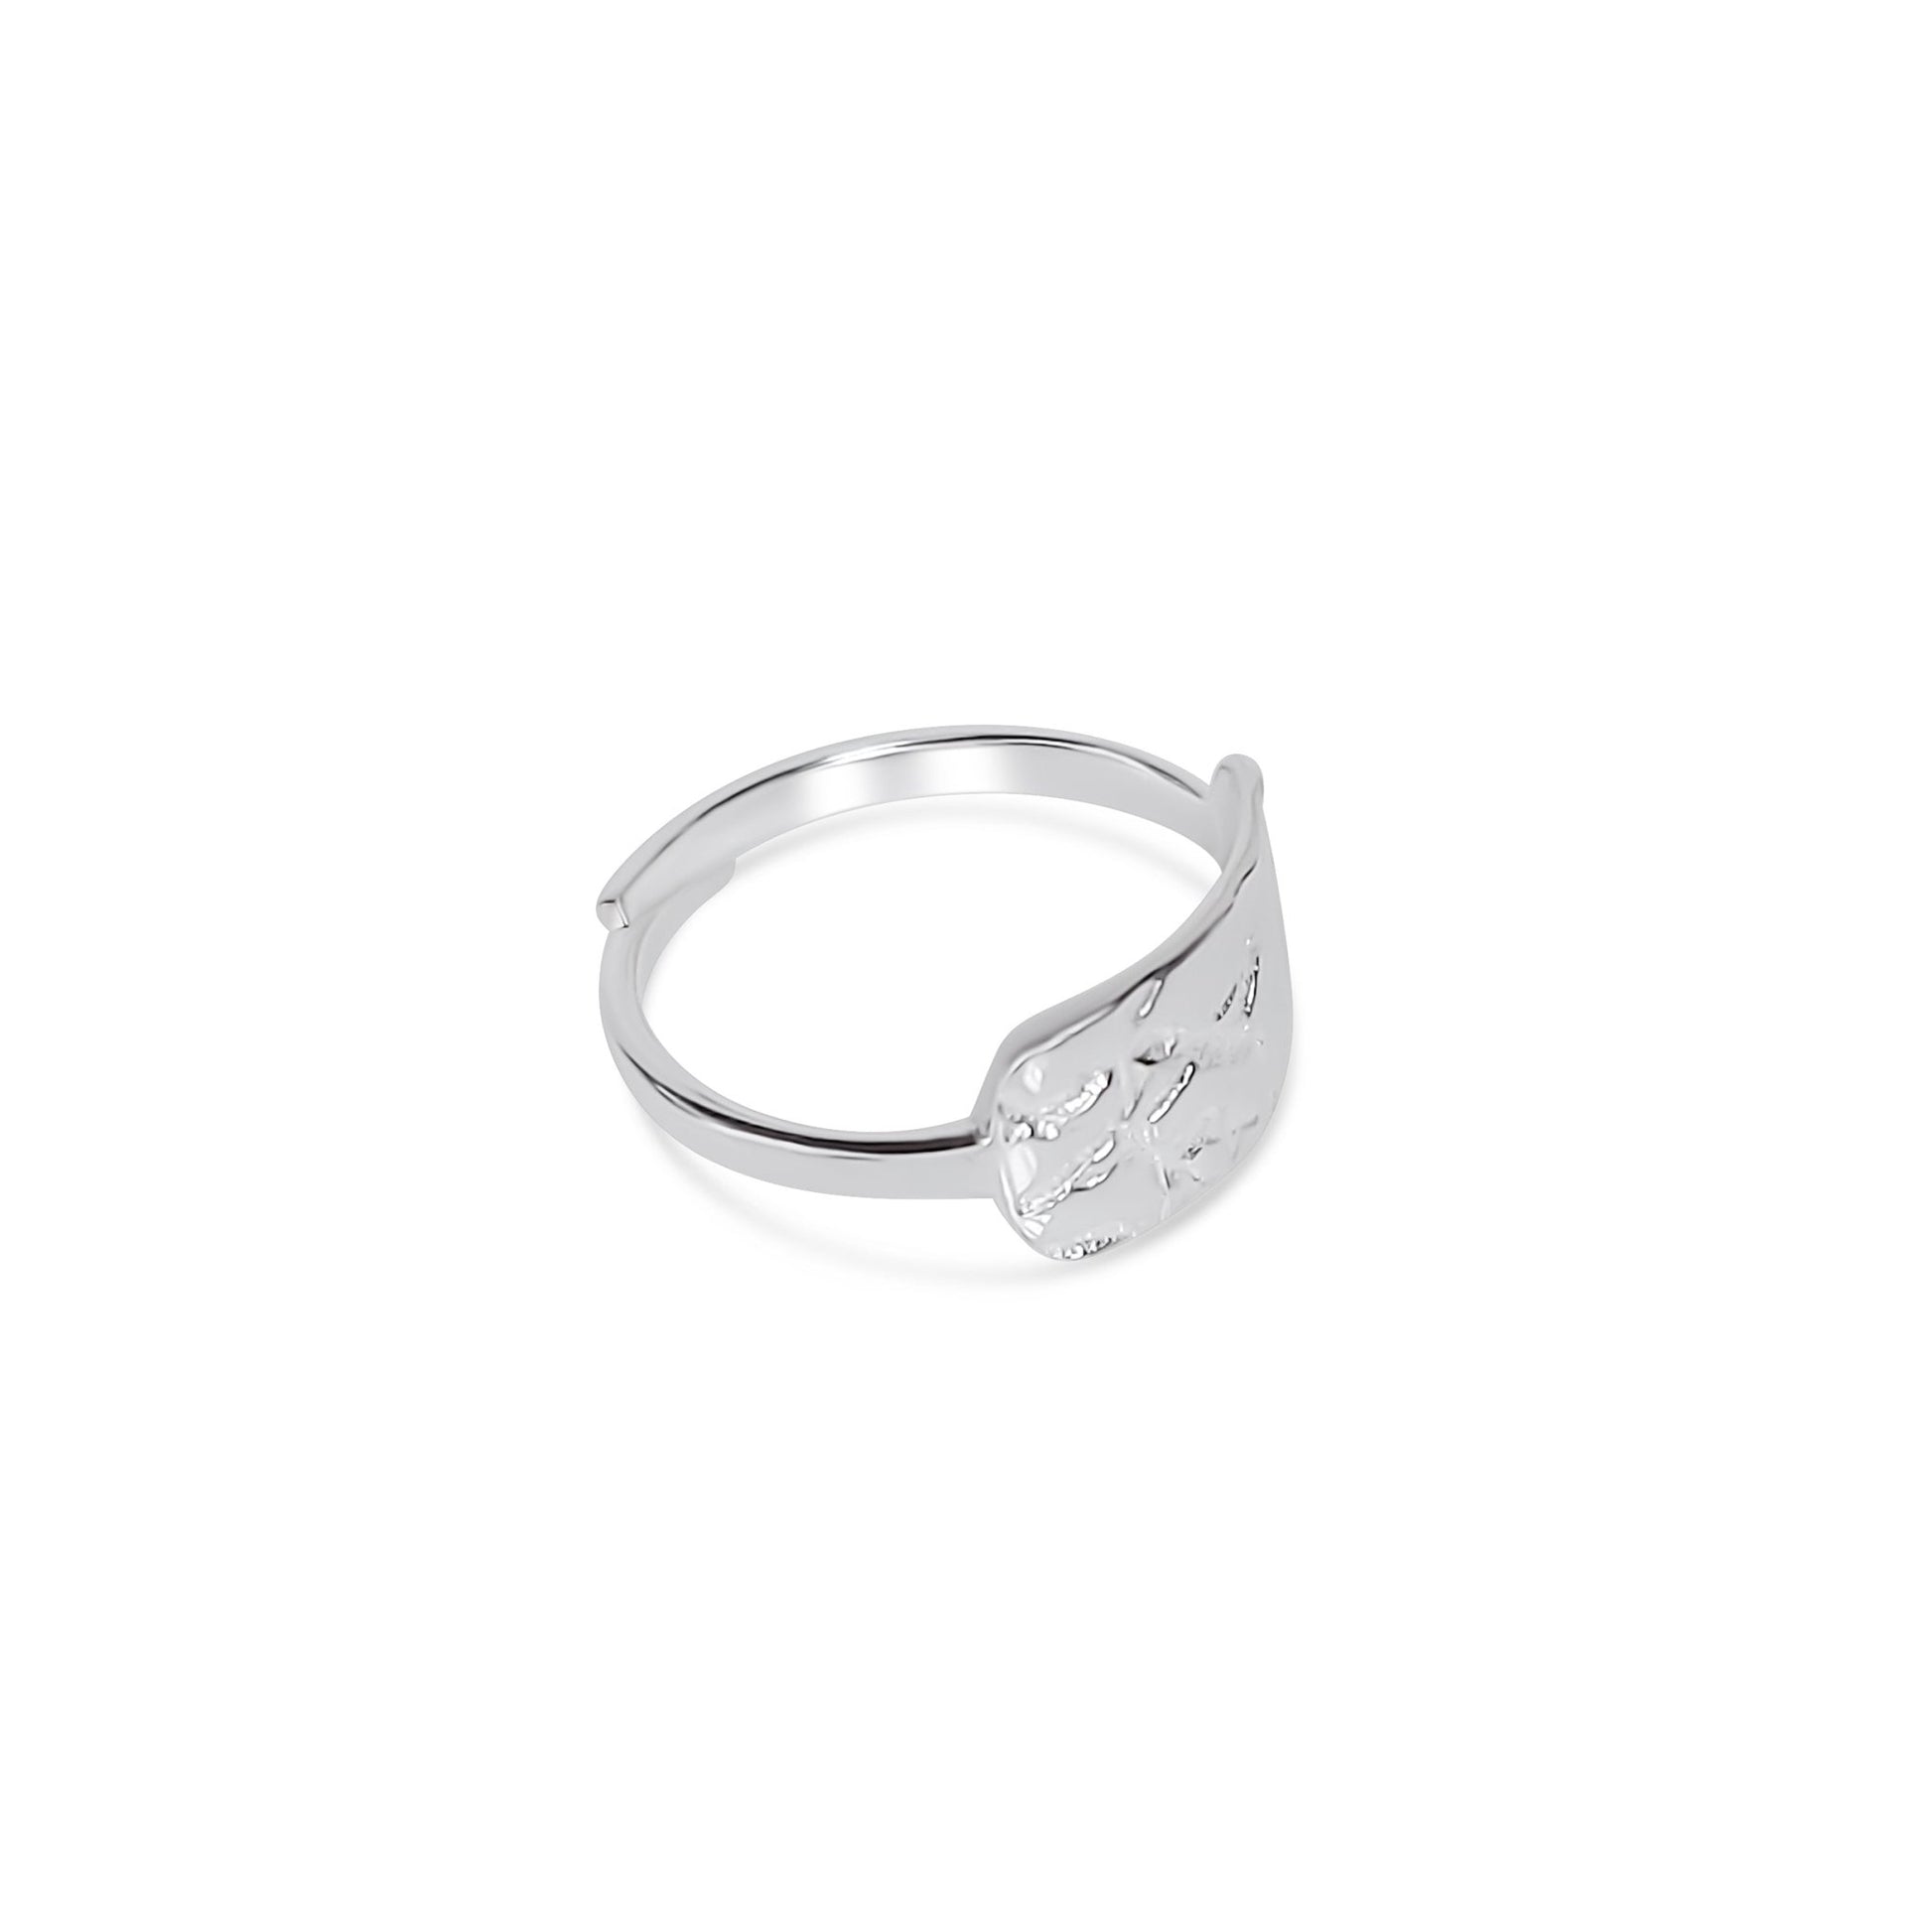 Marley - Sterling silver driftwood textured adjustable ring  - sideview